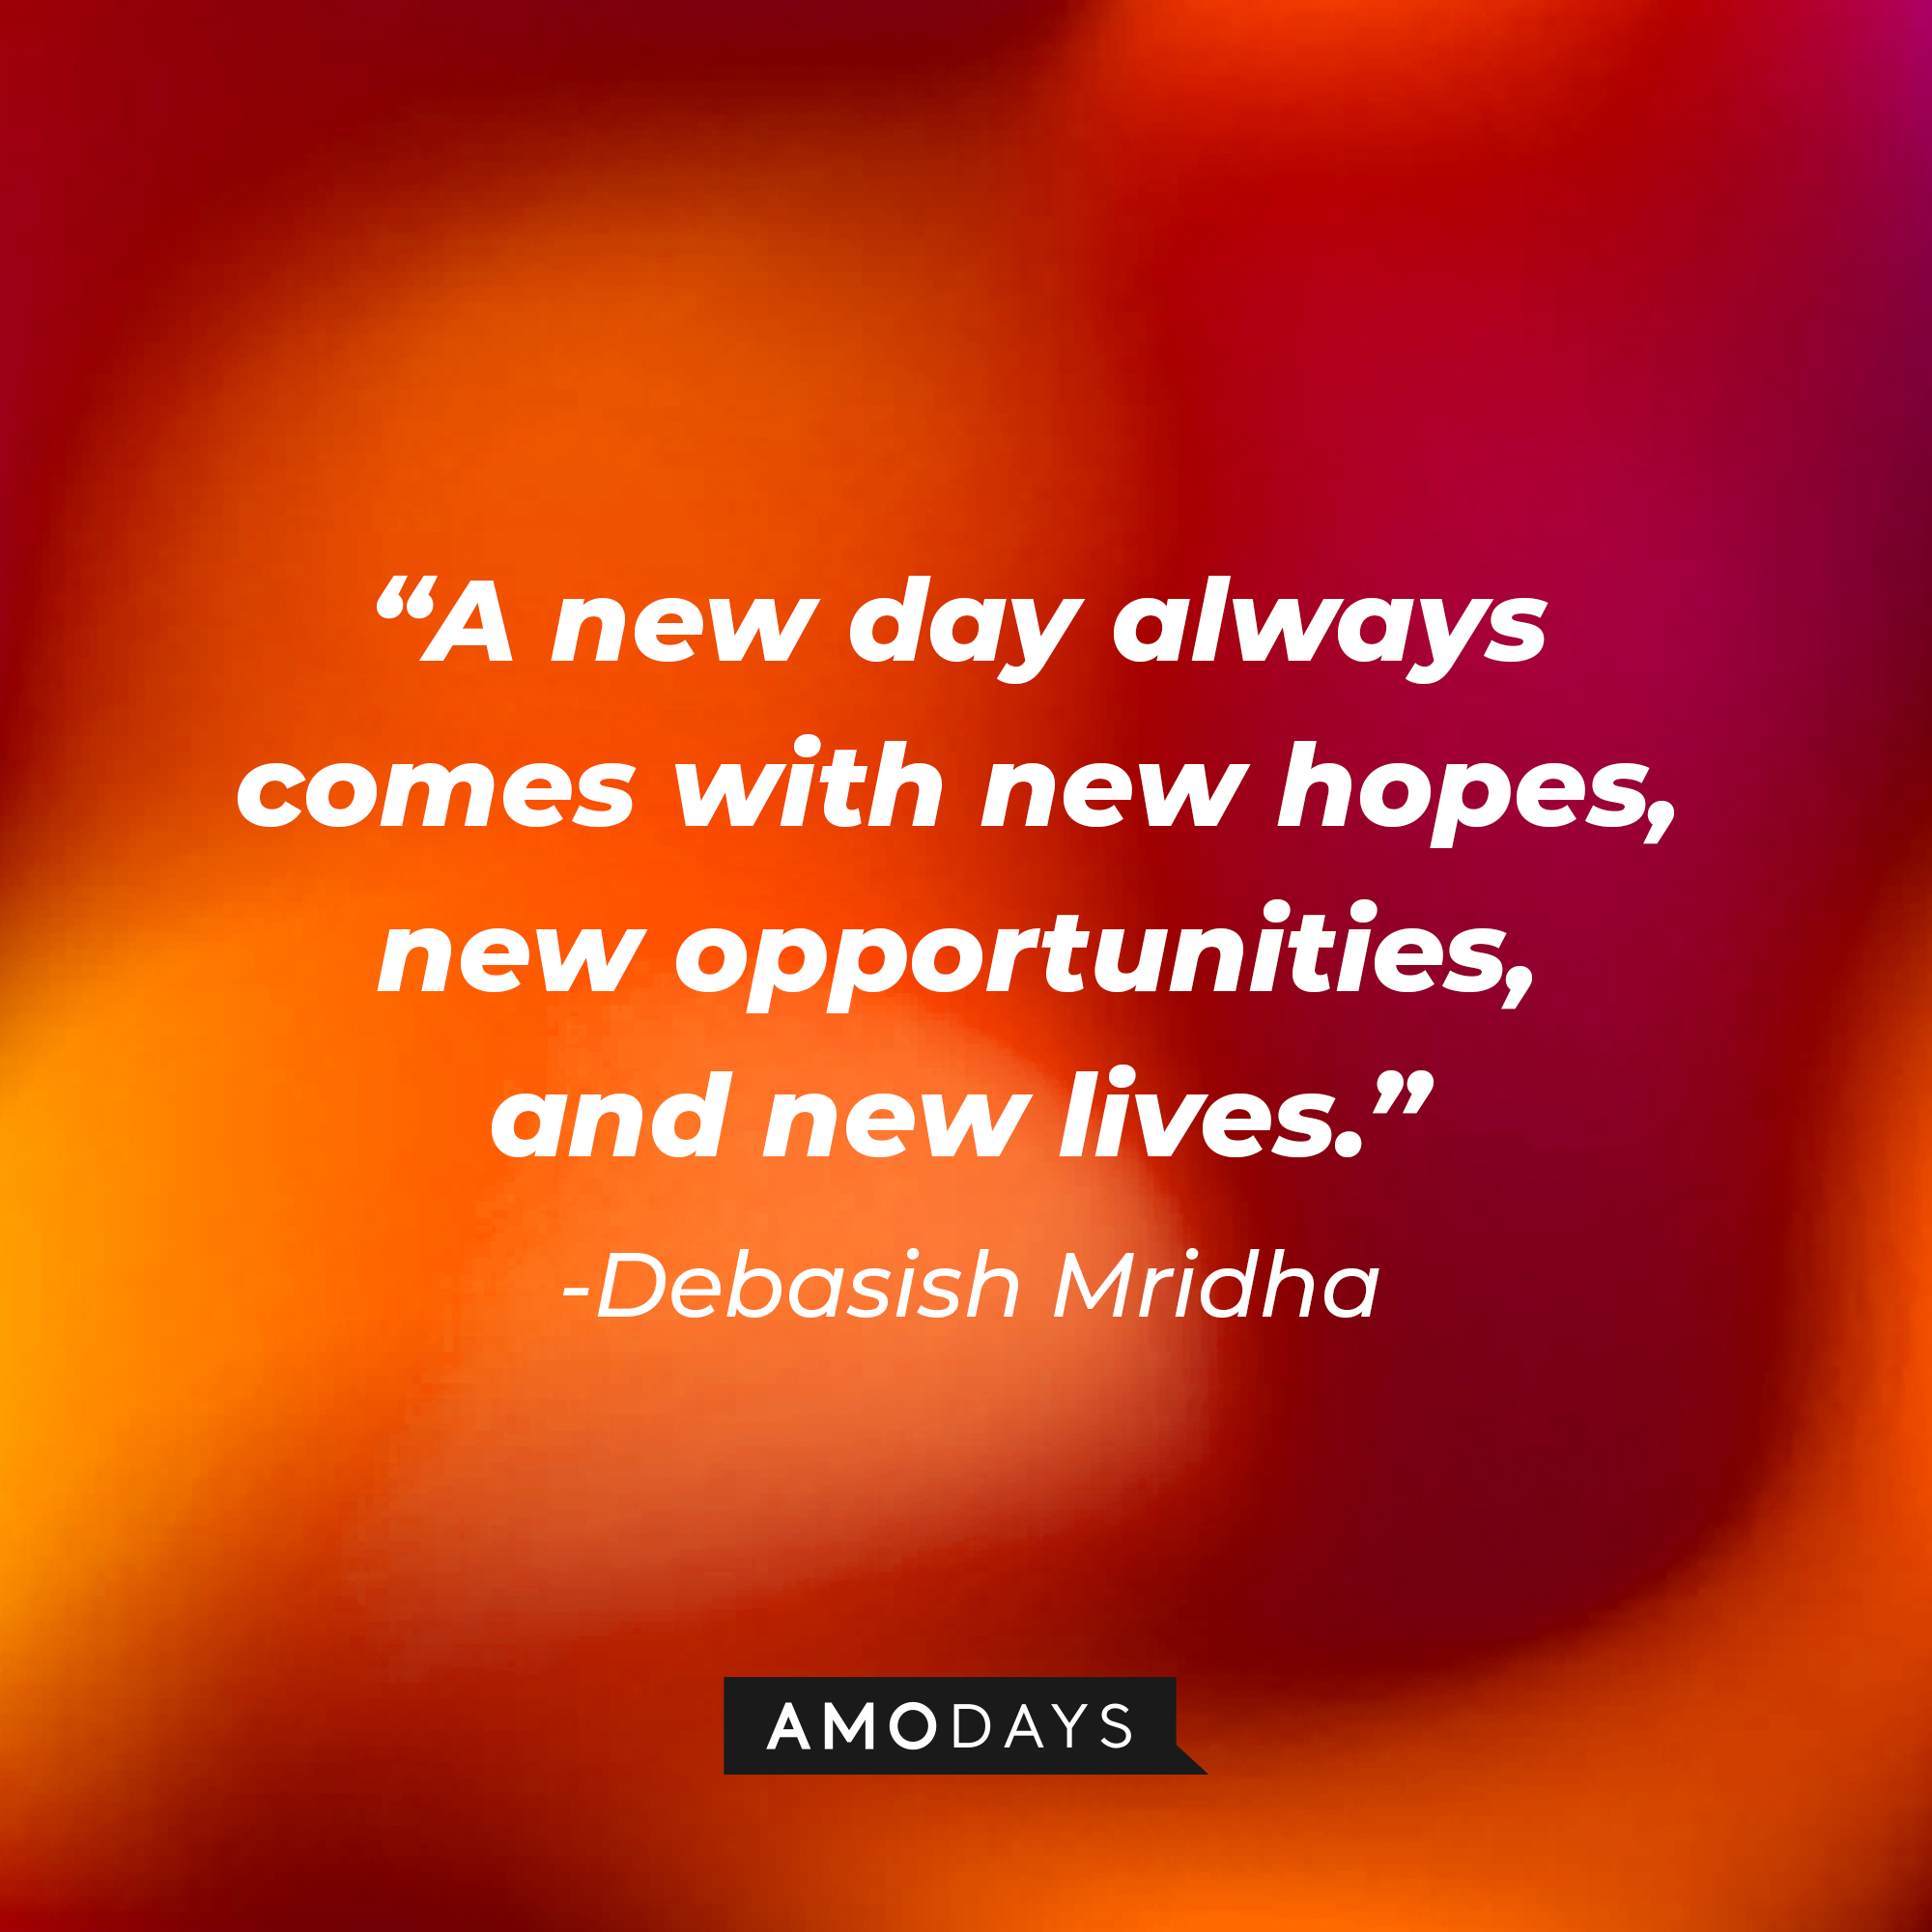 Debasish Mridha’s quote: "A new day always comes with new hopes, new opportunities, and new lives."  | Image: Amodays